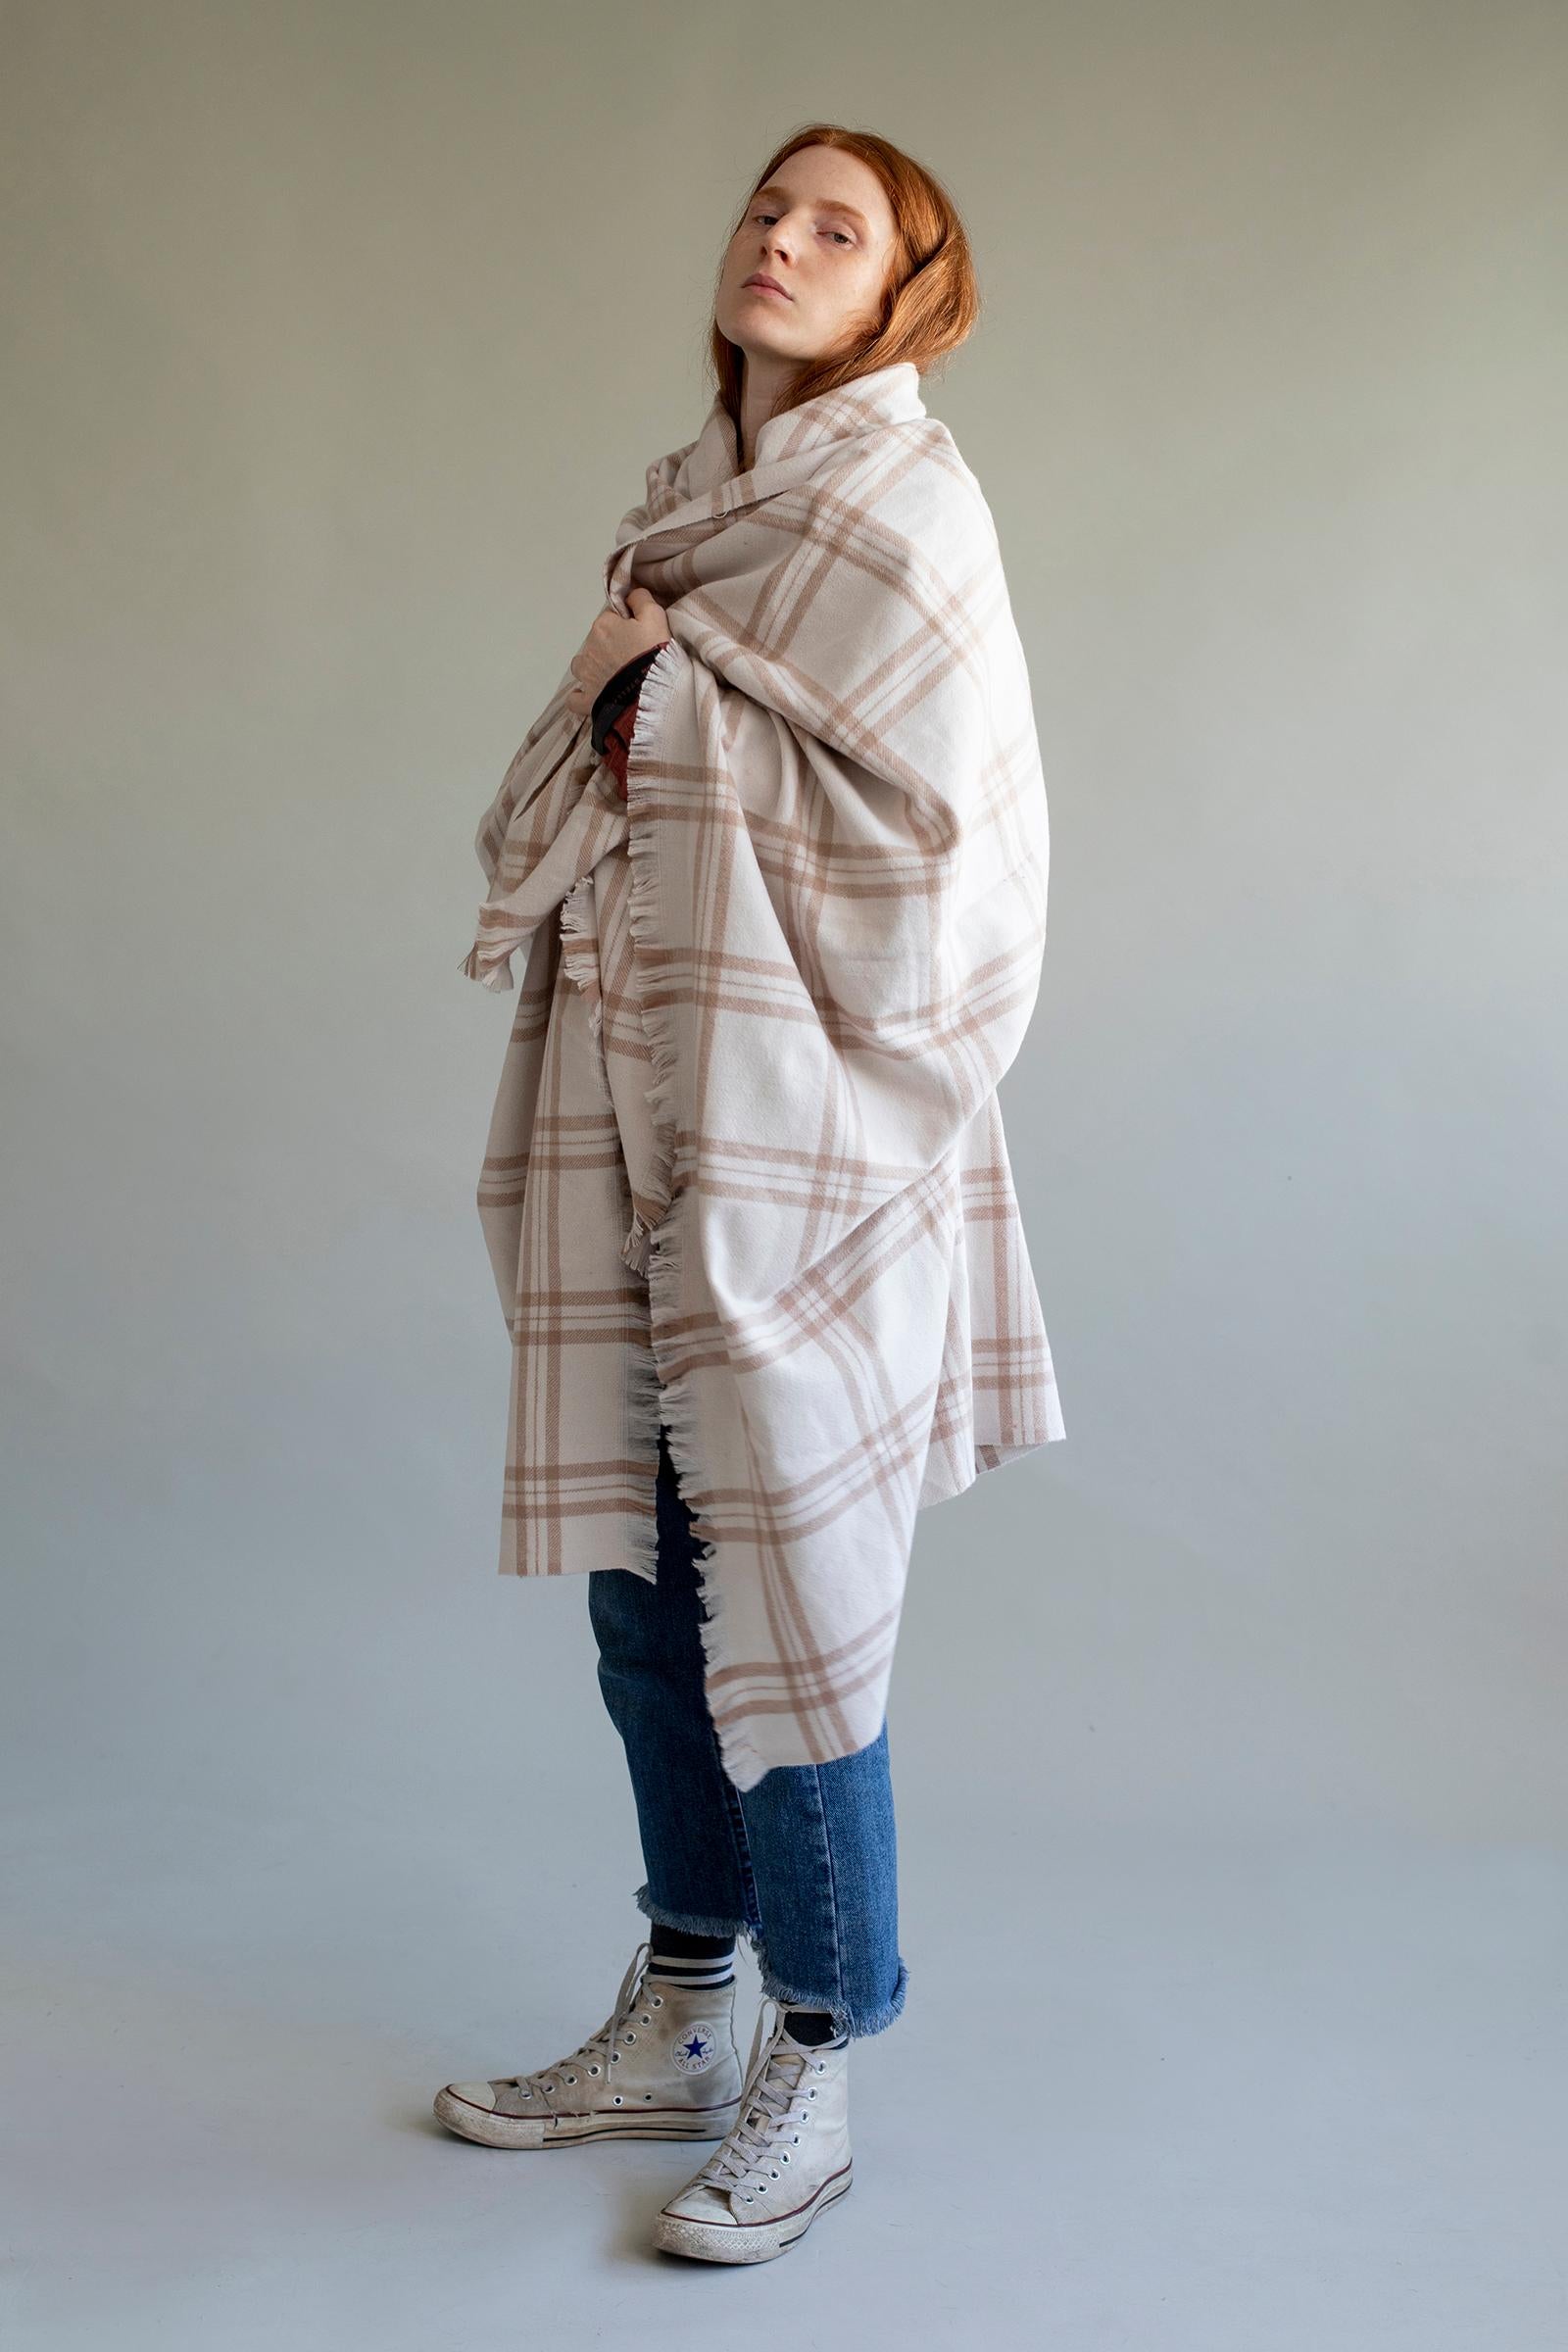 The plaid strap blanket is an extension of iota’s outdoor collection. It is also designed to move with us between spaces, to accompany us throughout the day, at home, in the office, or on a trip. A blanket with straps, which will cover us when it is